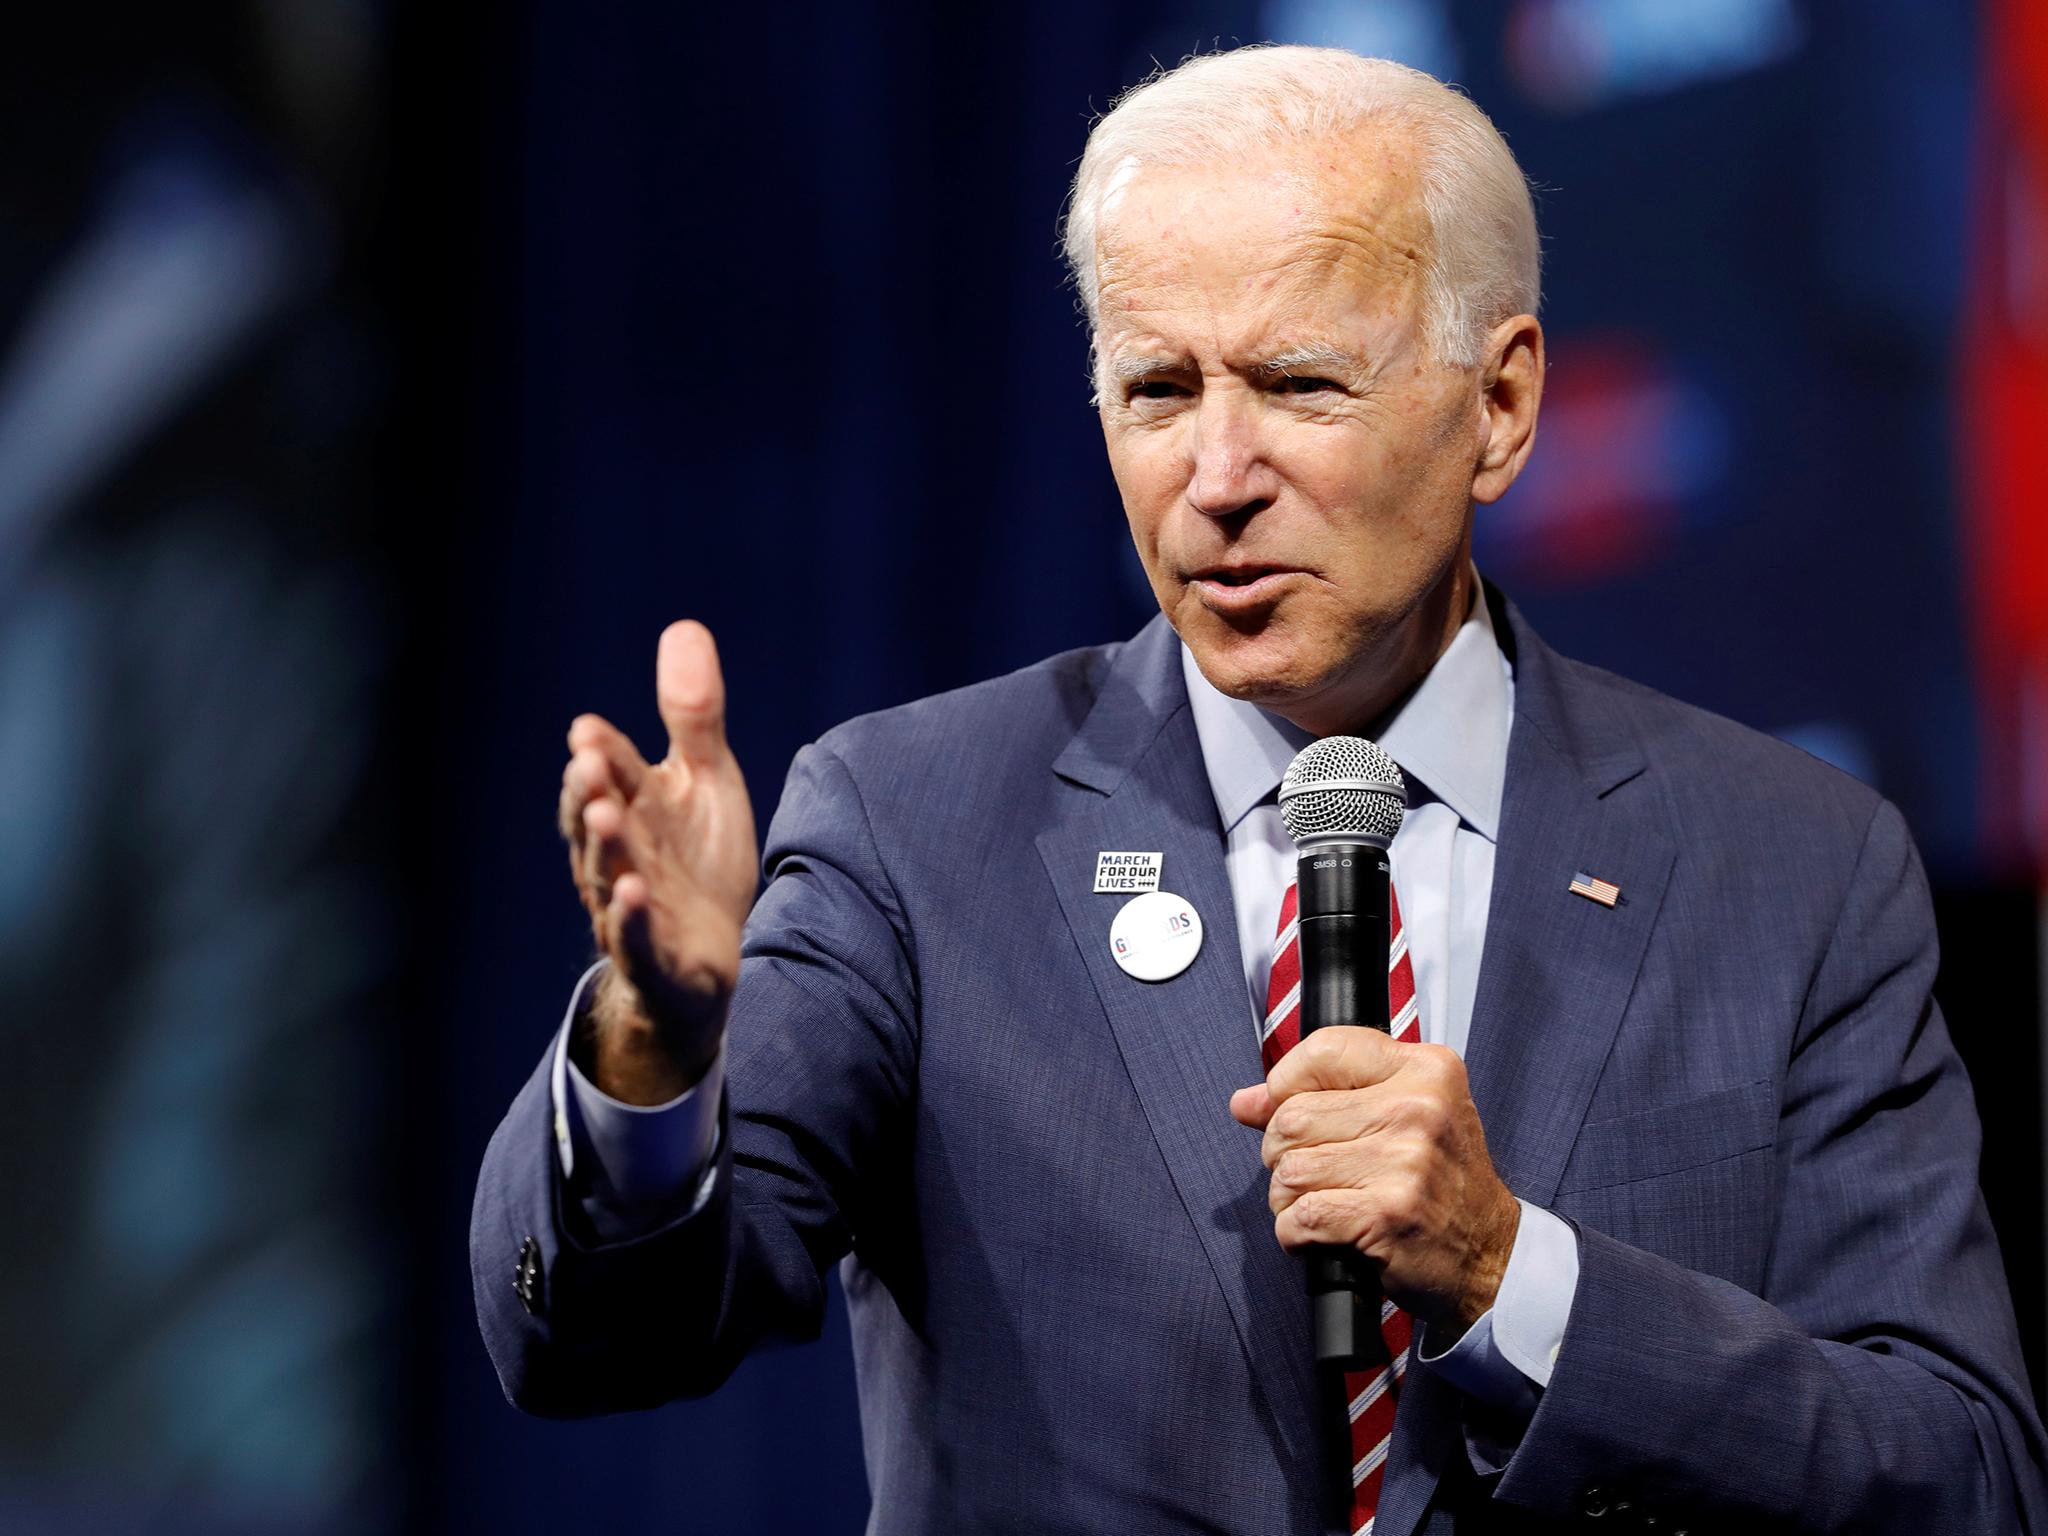 Mr Biden made his comments on a campaign trip through Nevada on Wednesday